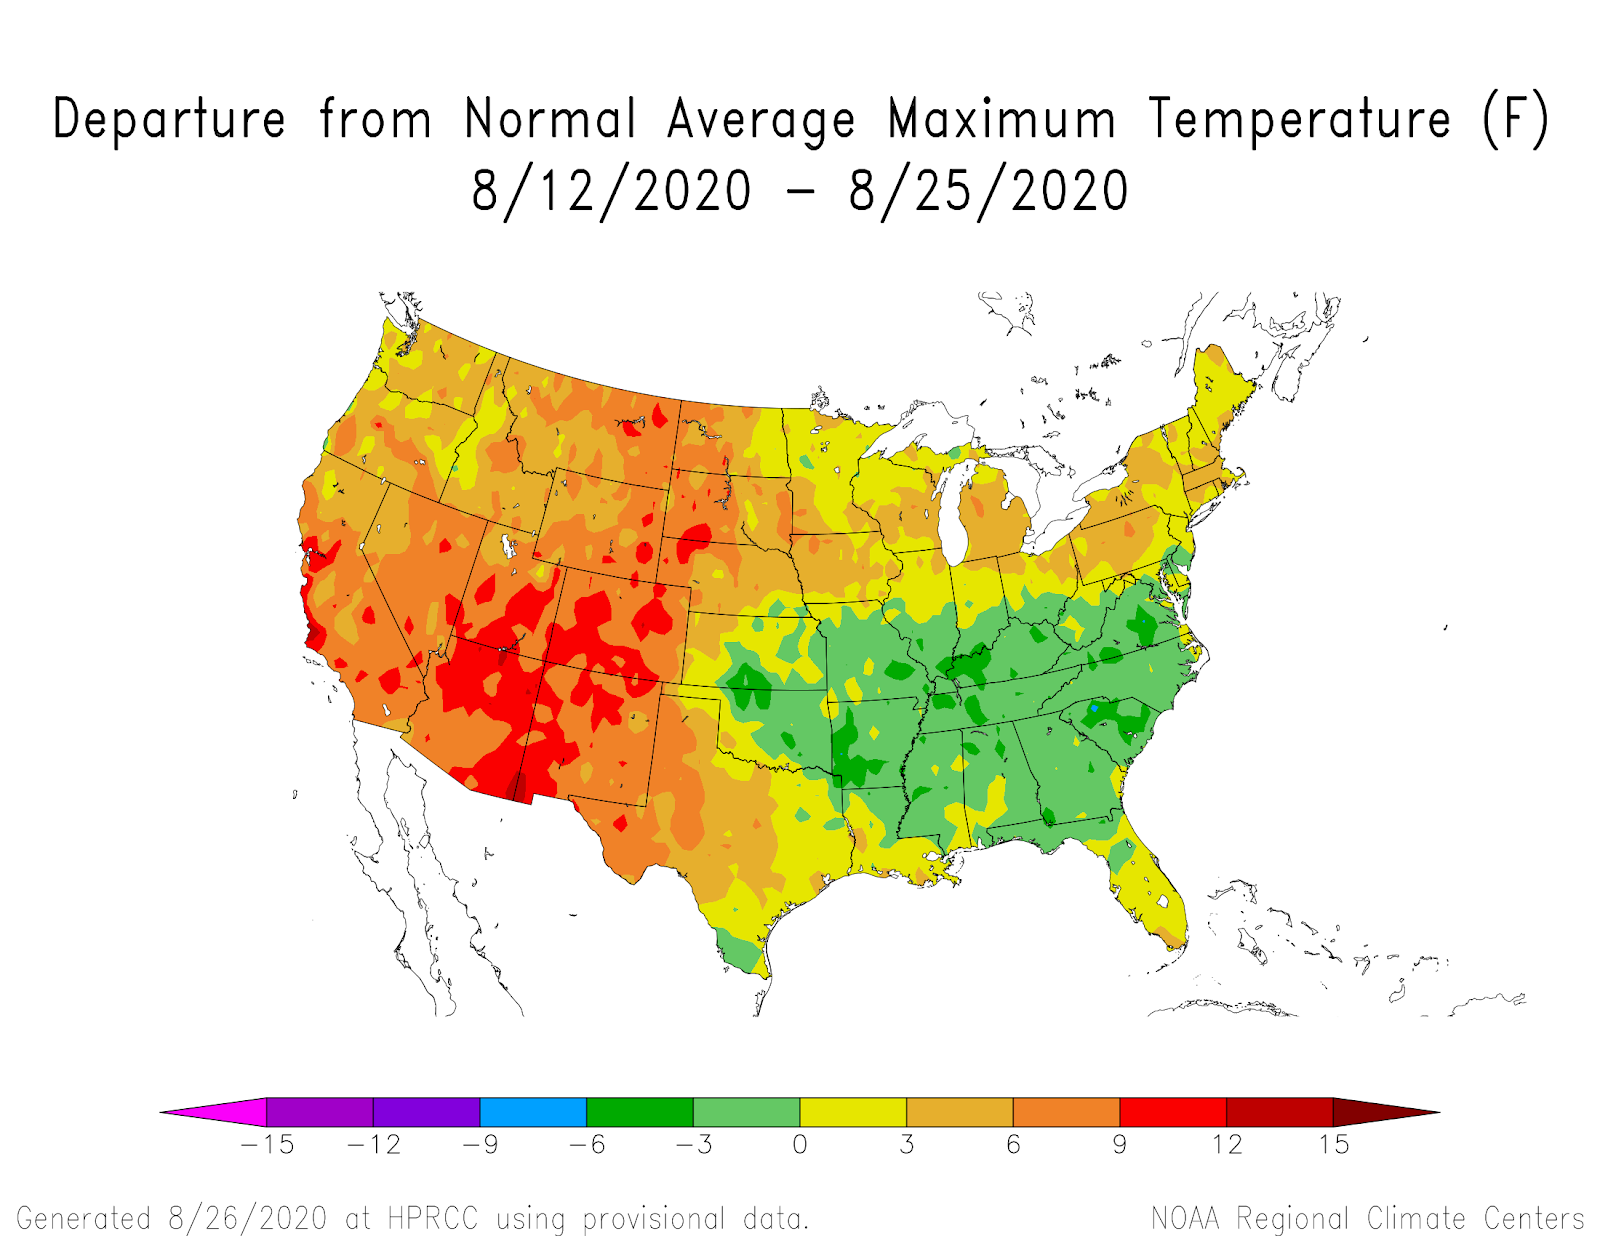 High Plains Regional Climate Center map showing two-week departure from normal average maximum temperature for the contiguous U.S.